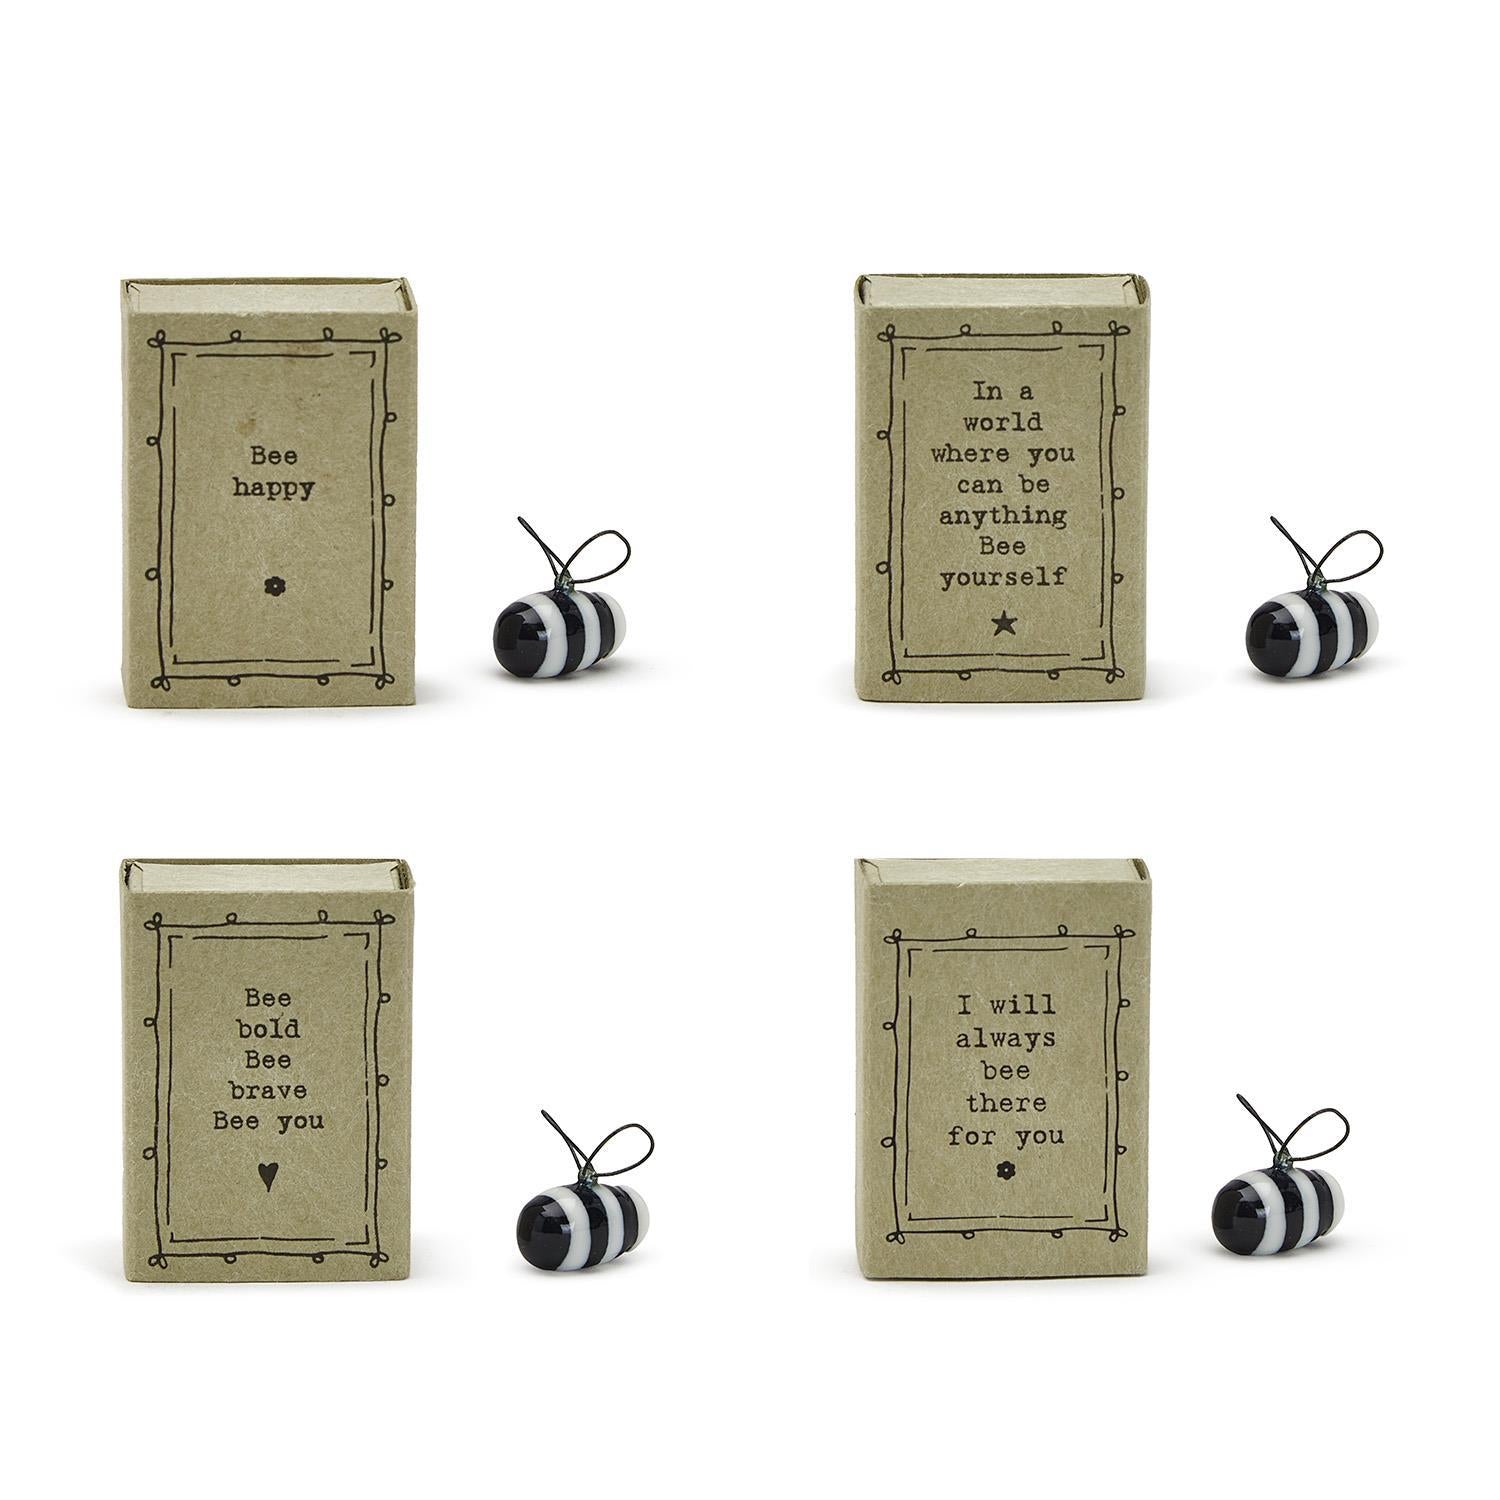 MATCHBOX BEE IN GIFT BOX WITH SAYING